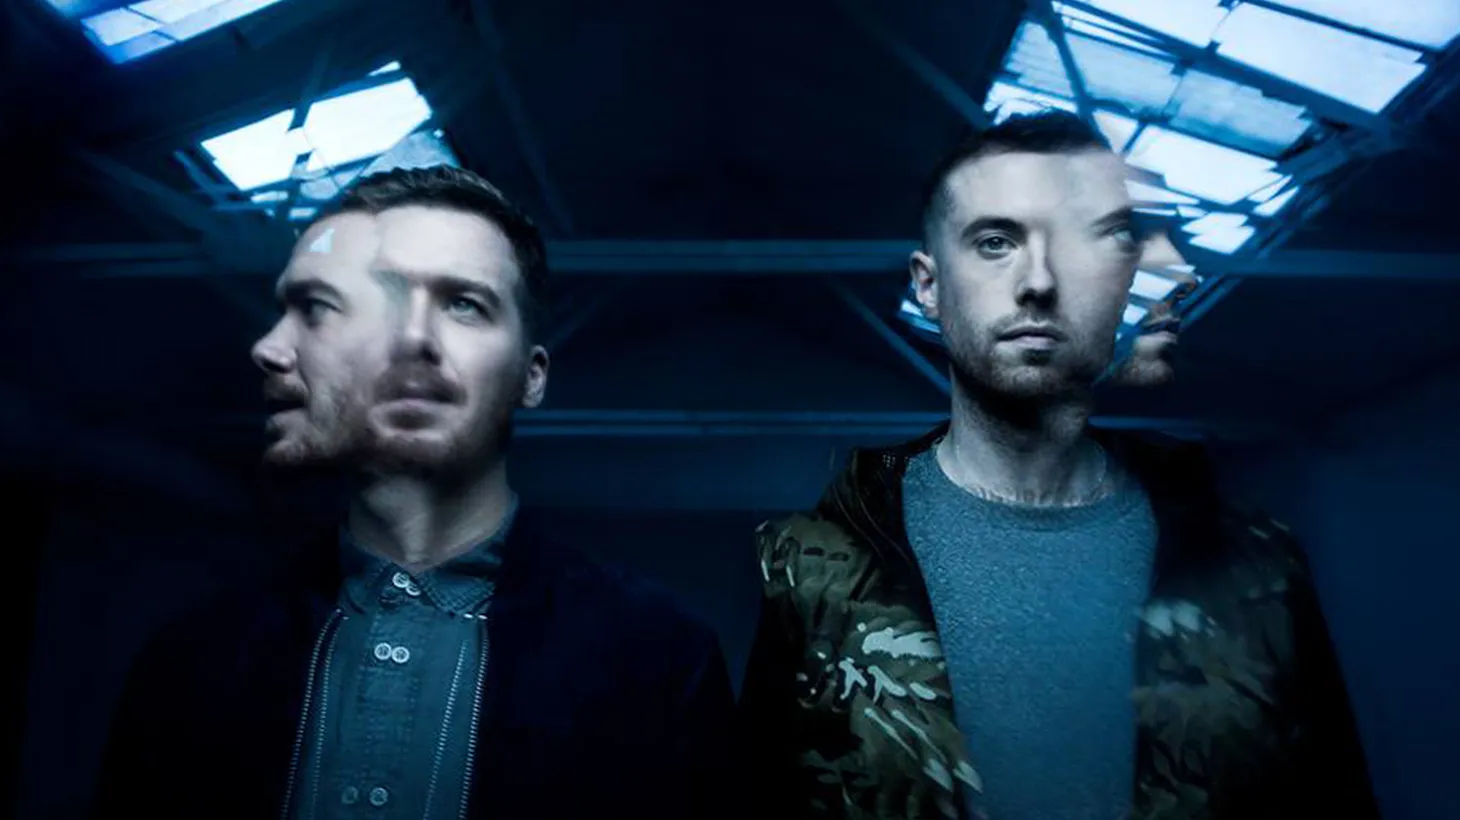 UK house duo Gorgon City joined us to premiere music from their album Kingdom.